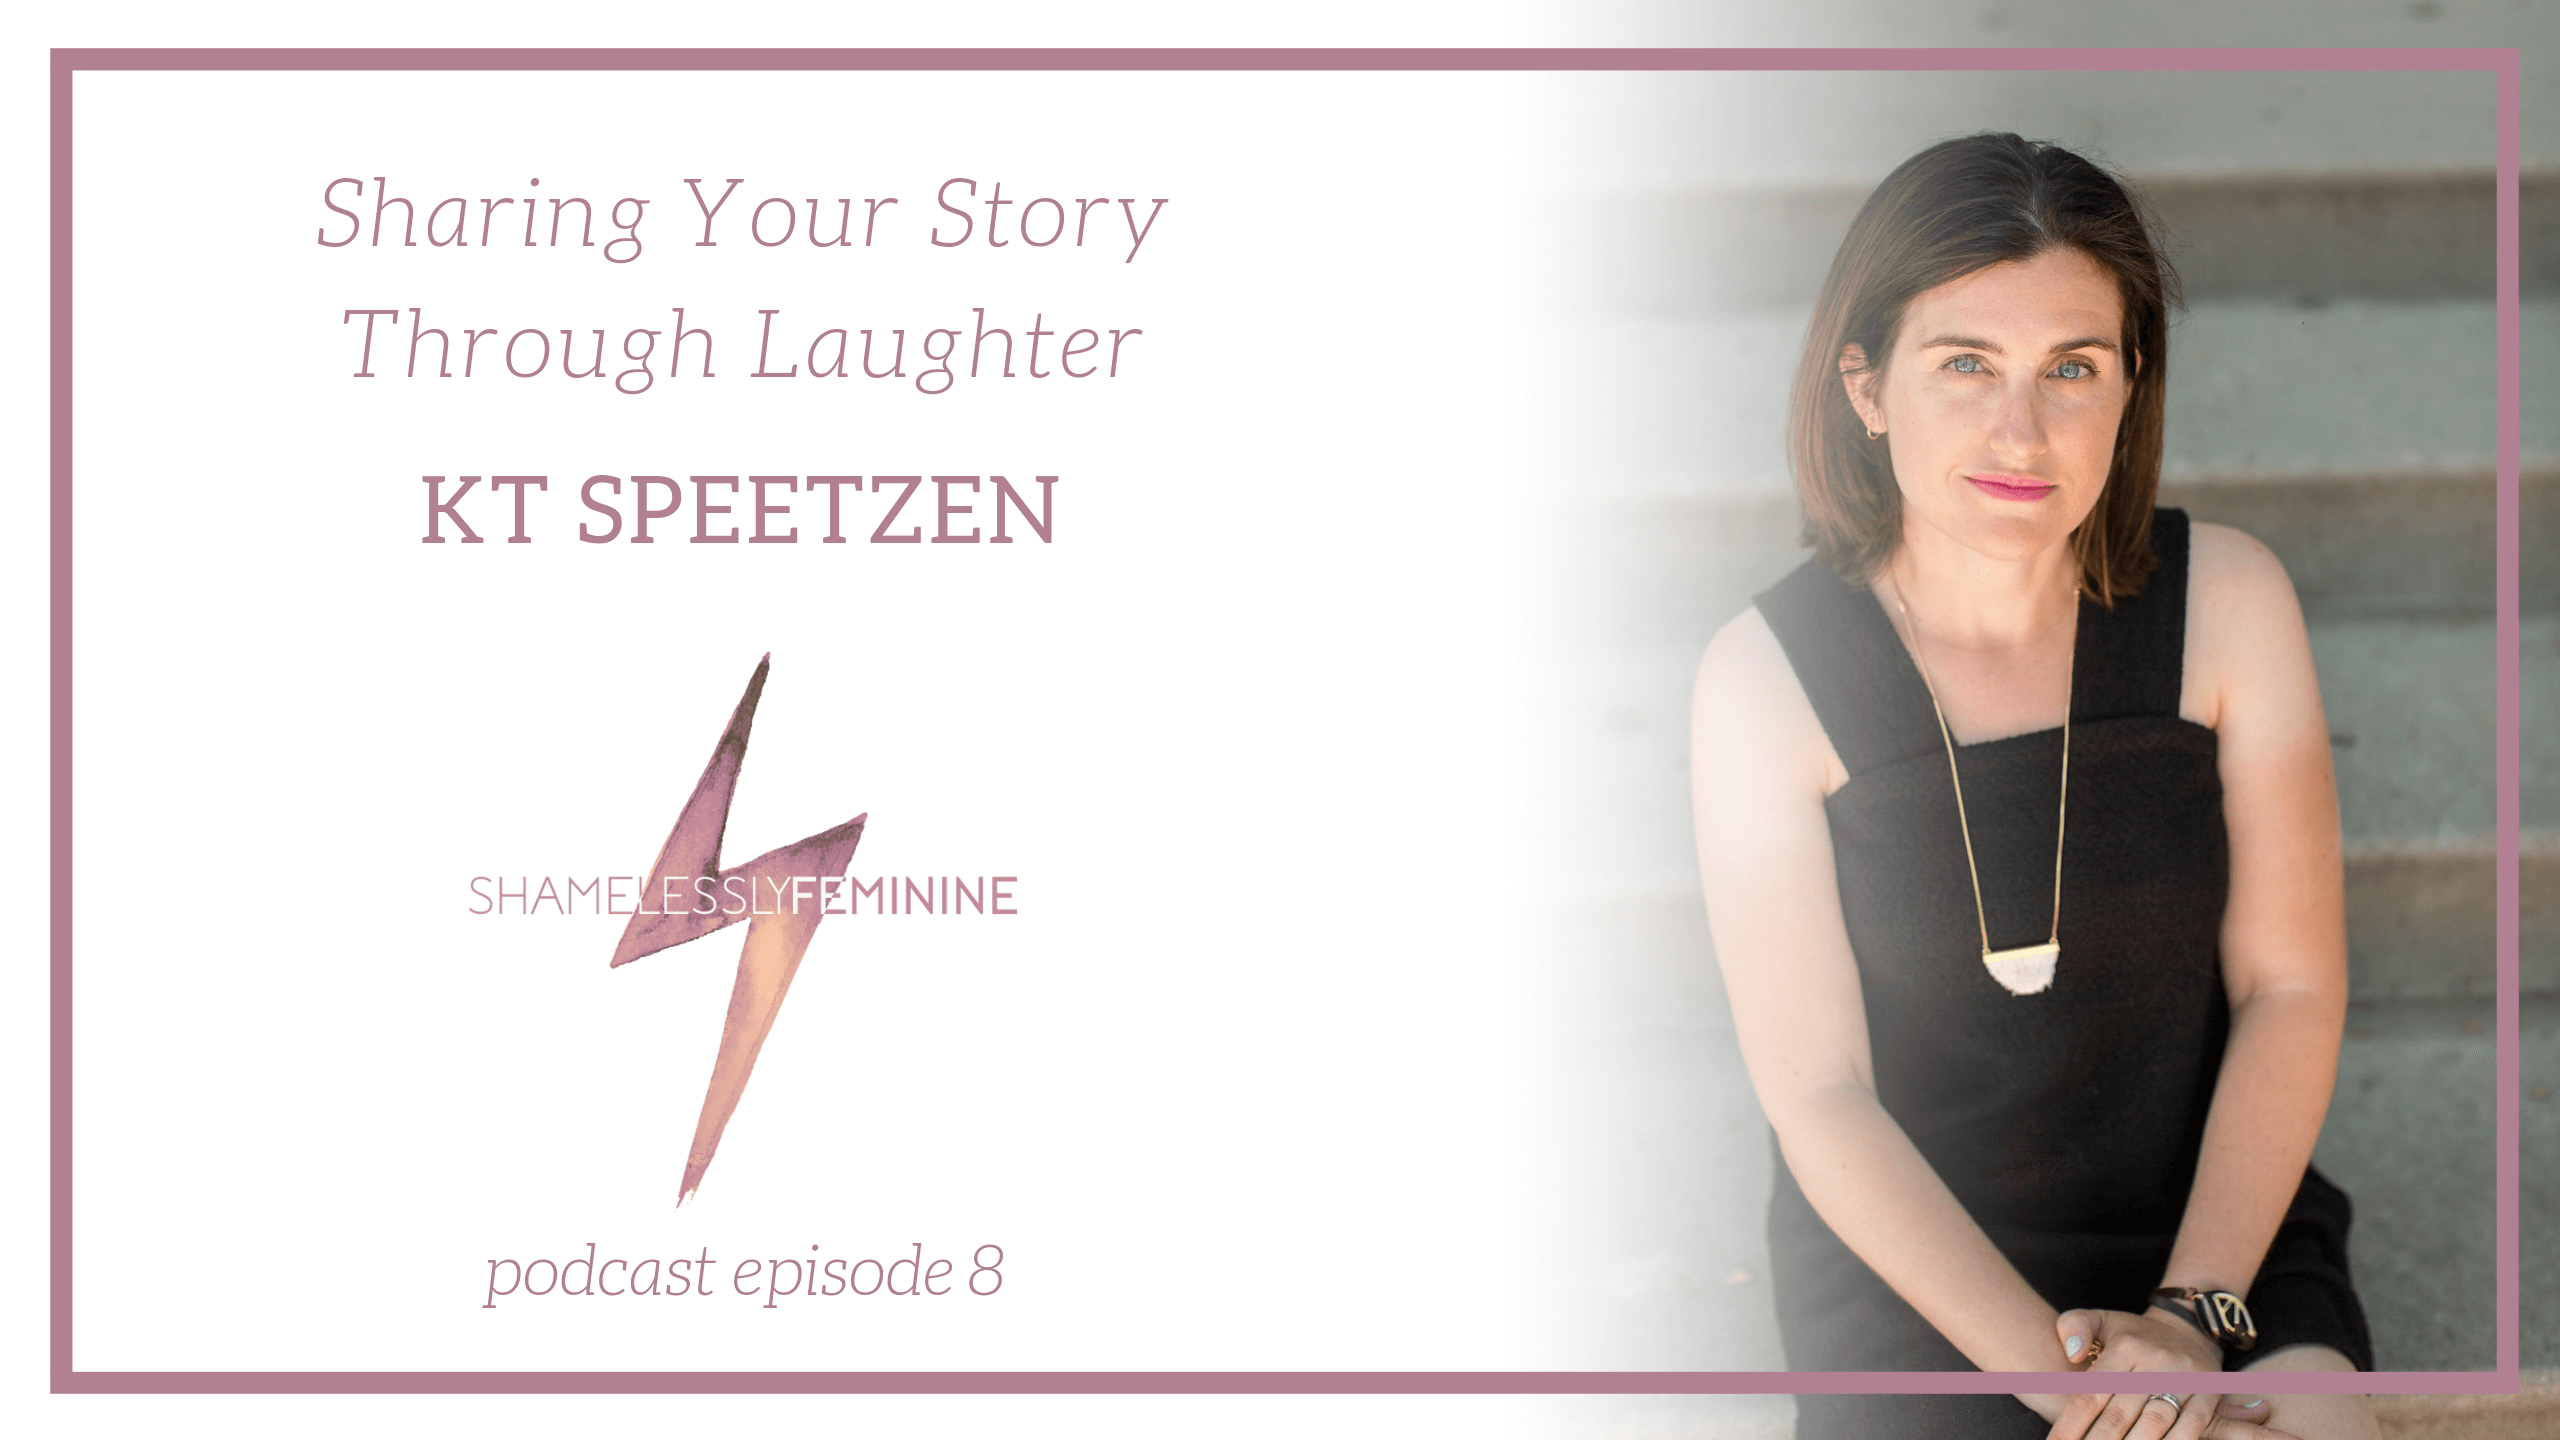 Episode 8: Sharing Your Story through Laughter with KT Speetzen